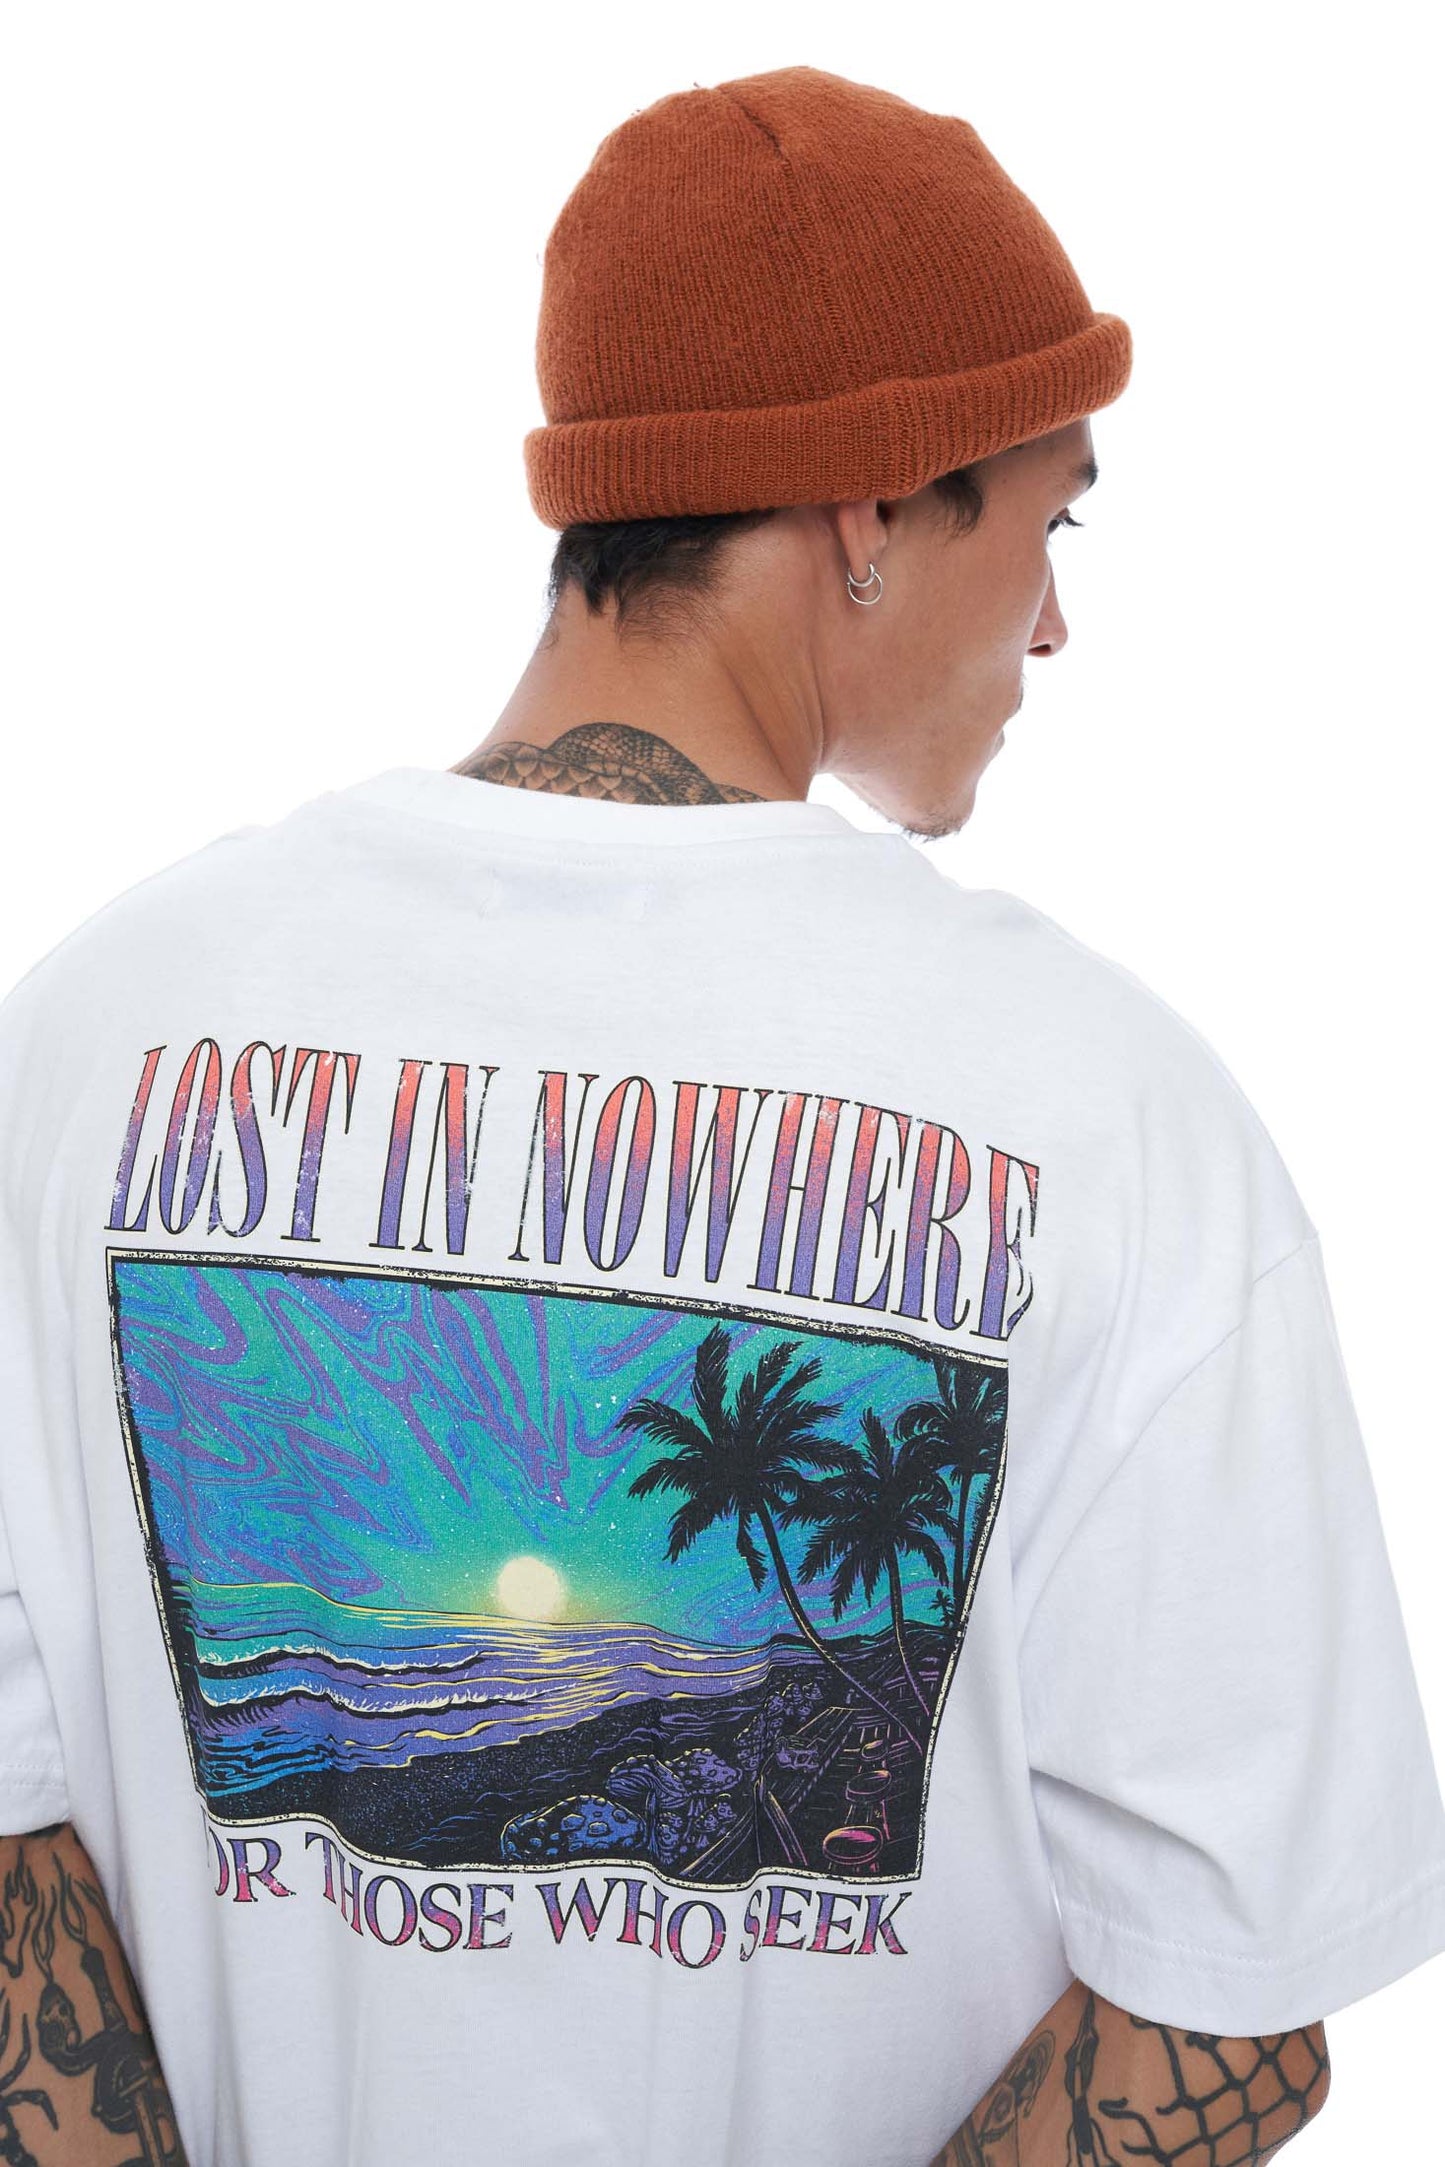 LOST IN NOWHERE // Retro Surf Tee WHITE